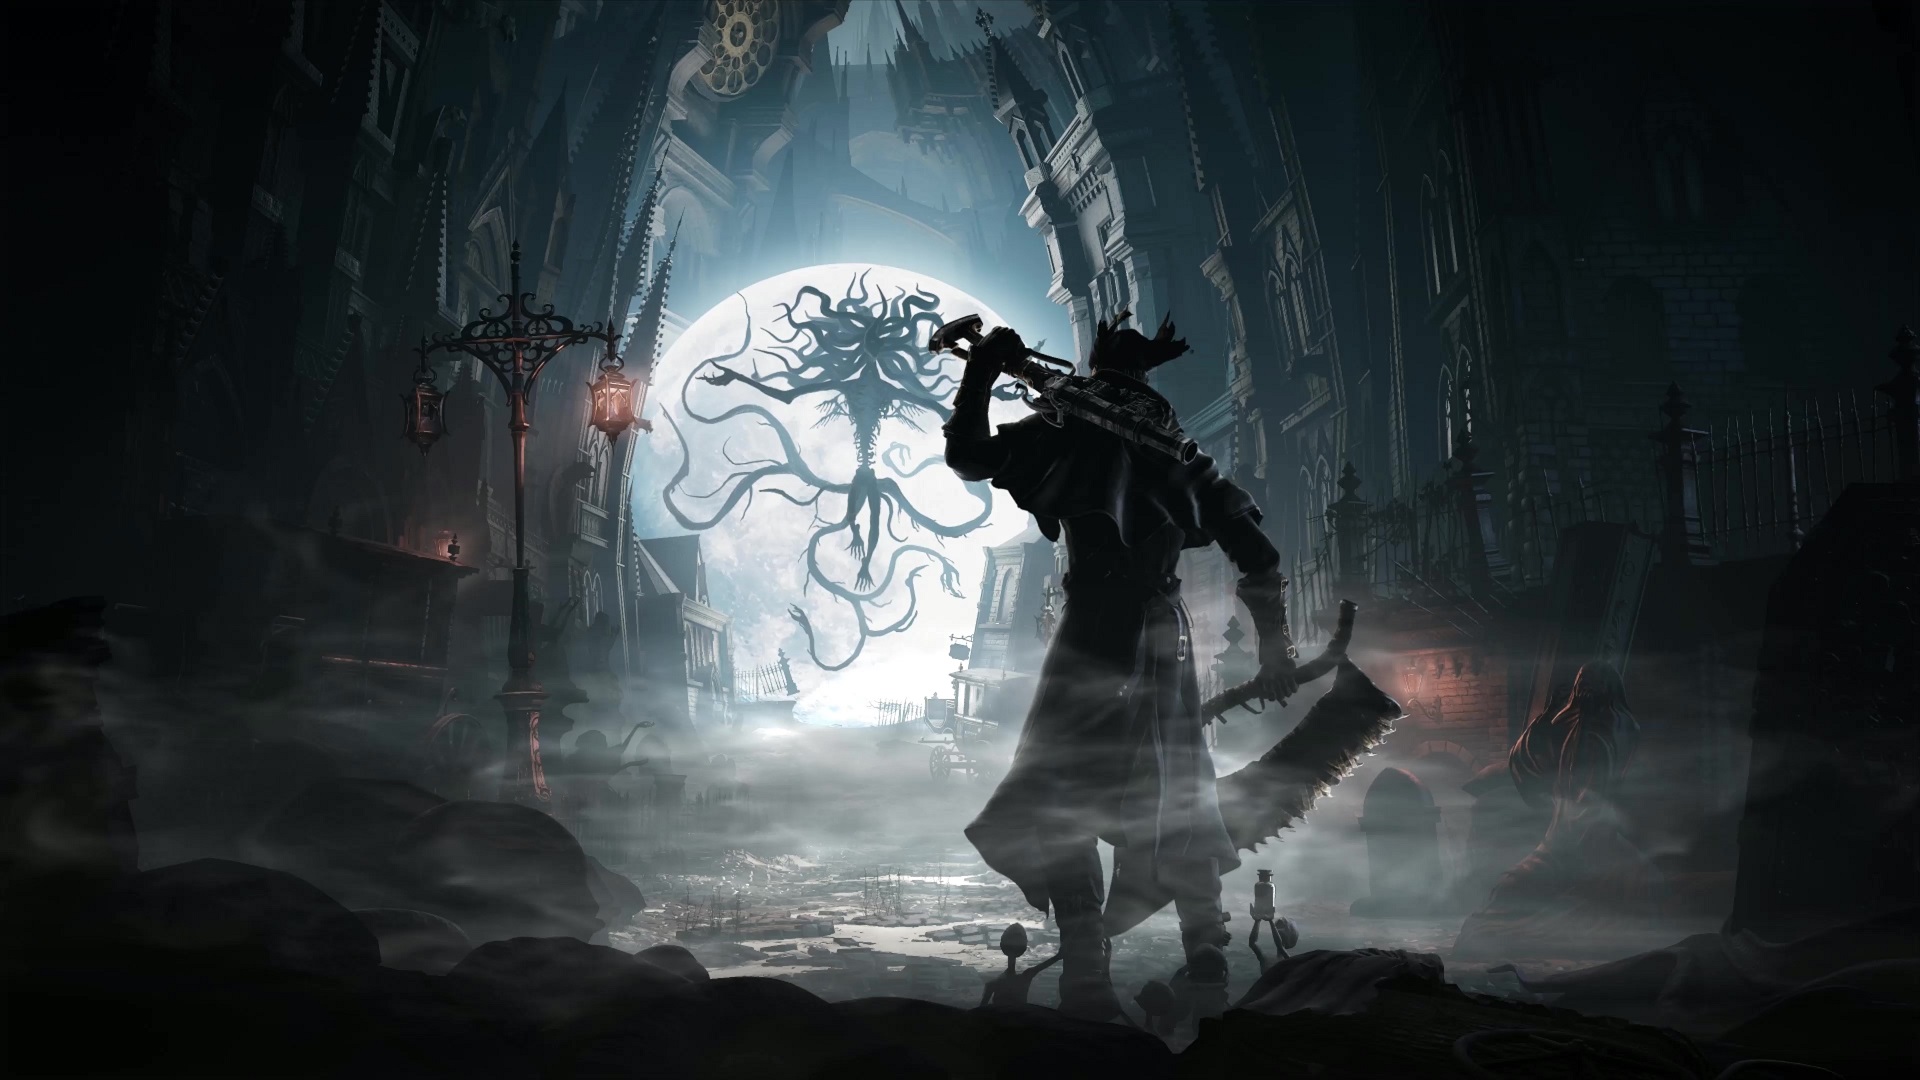 It looks like the Bloodborne remaster could be taken for granted, with even a release date and news later this month